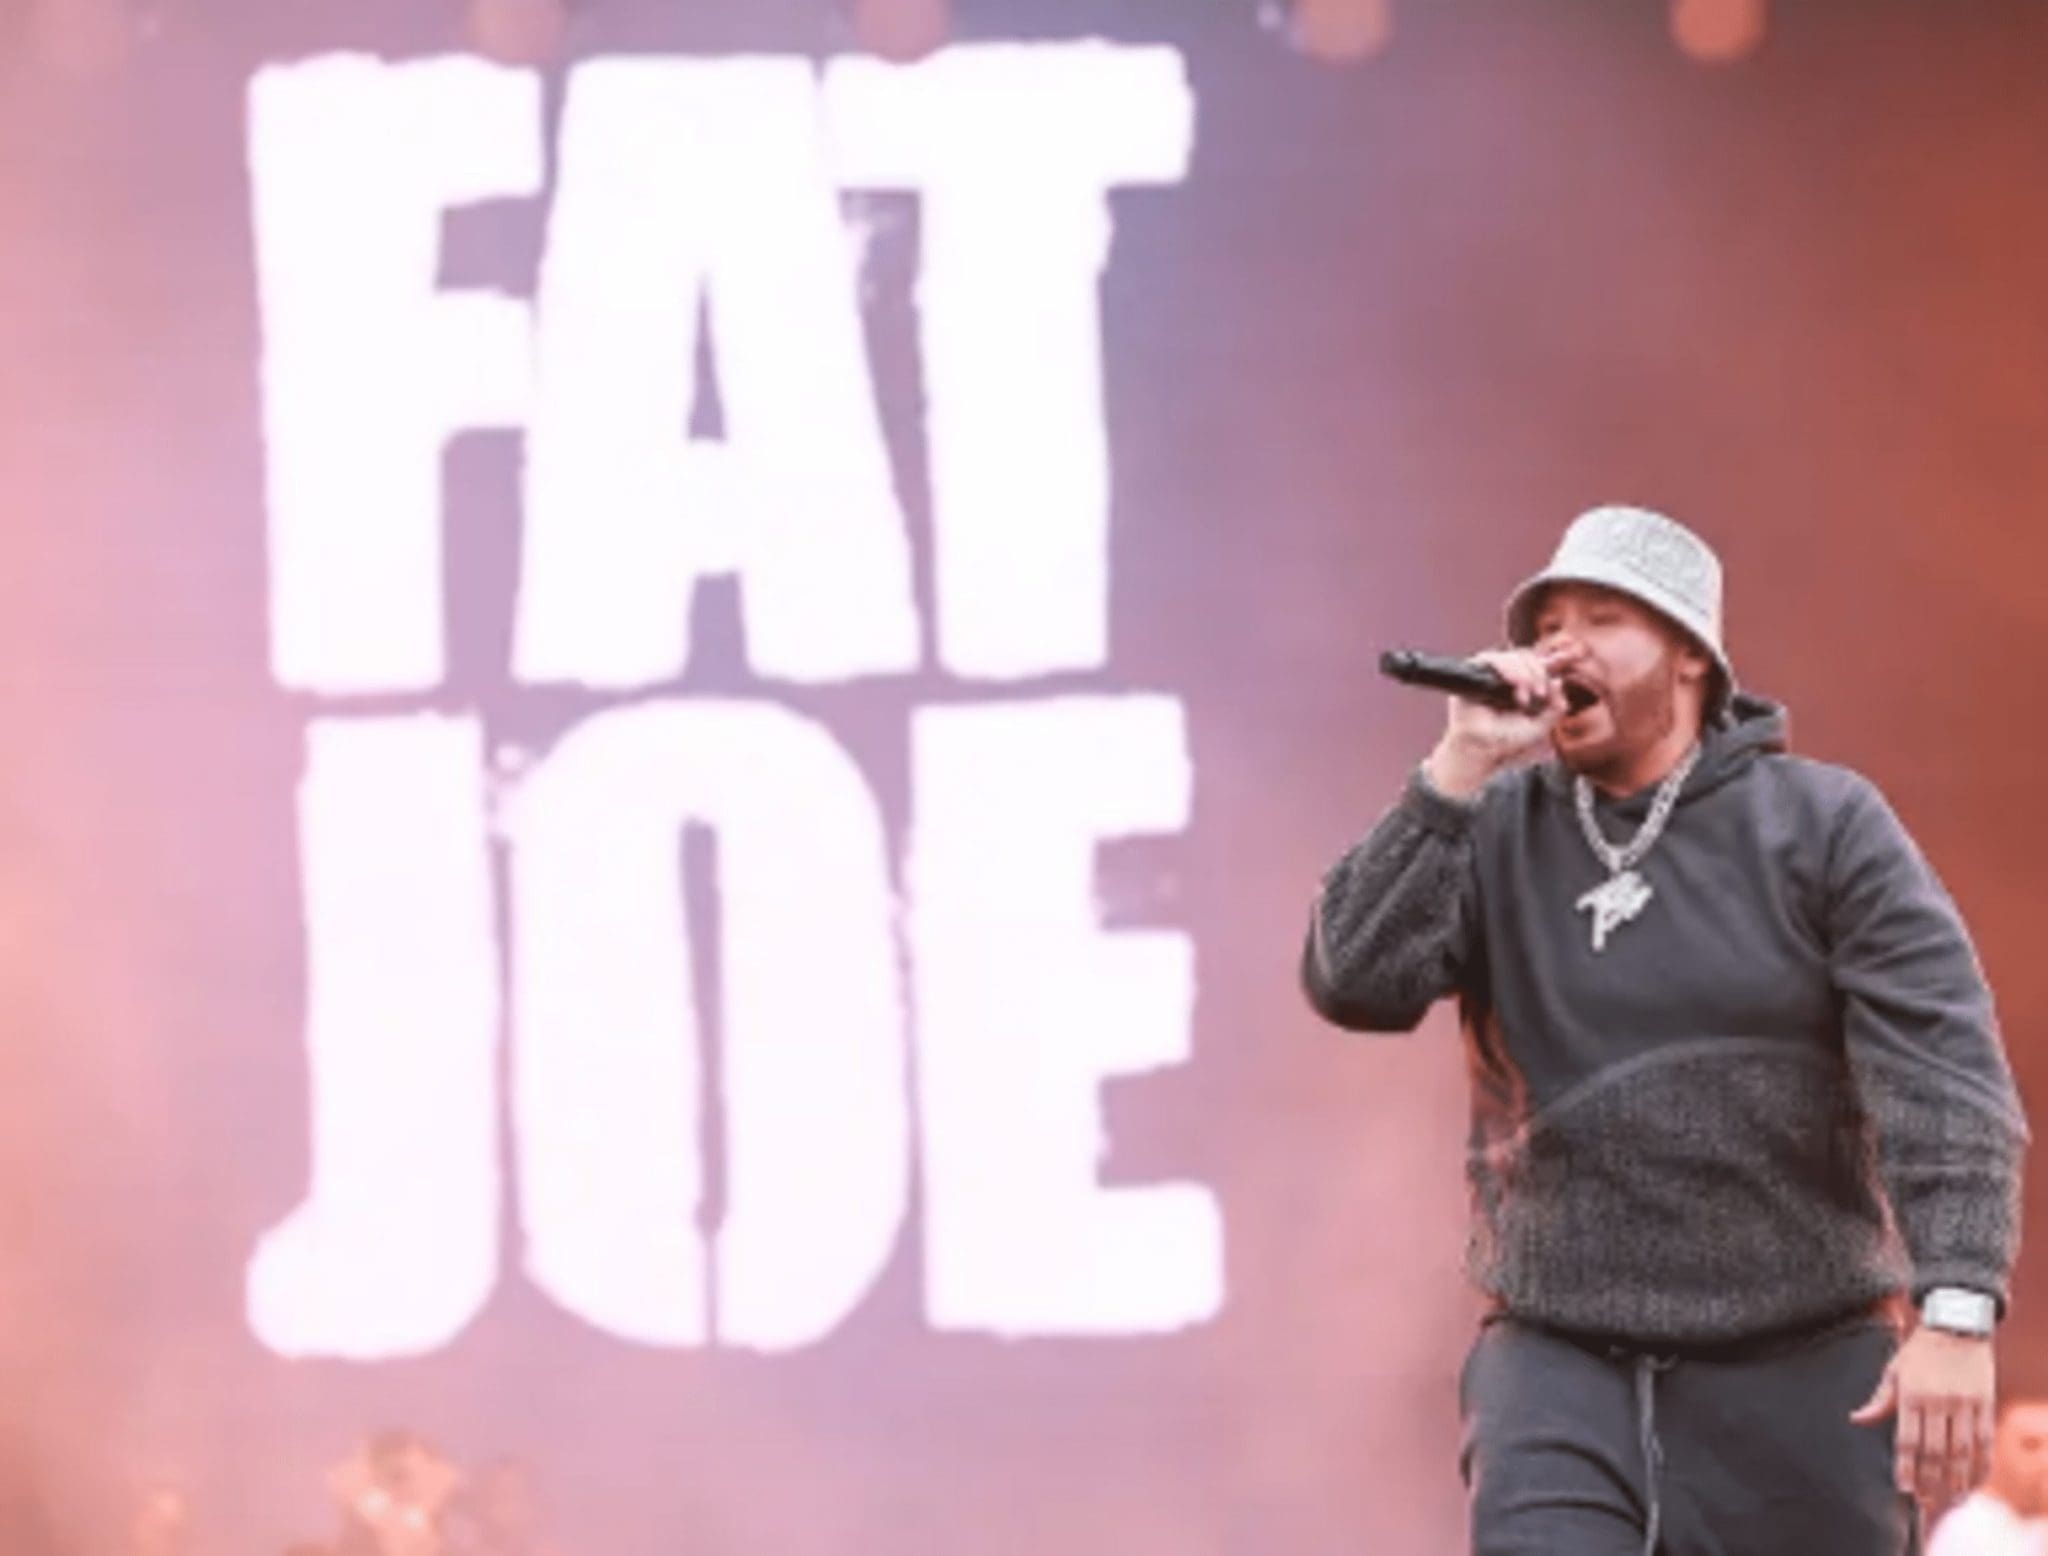 Fat Joe claims he will always use the moniker "Fat" in his professional identity